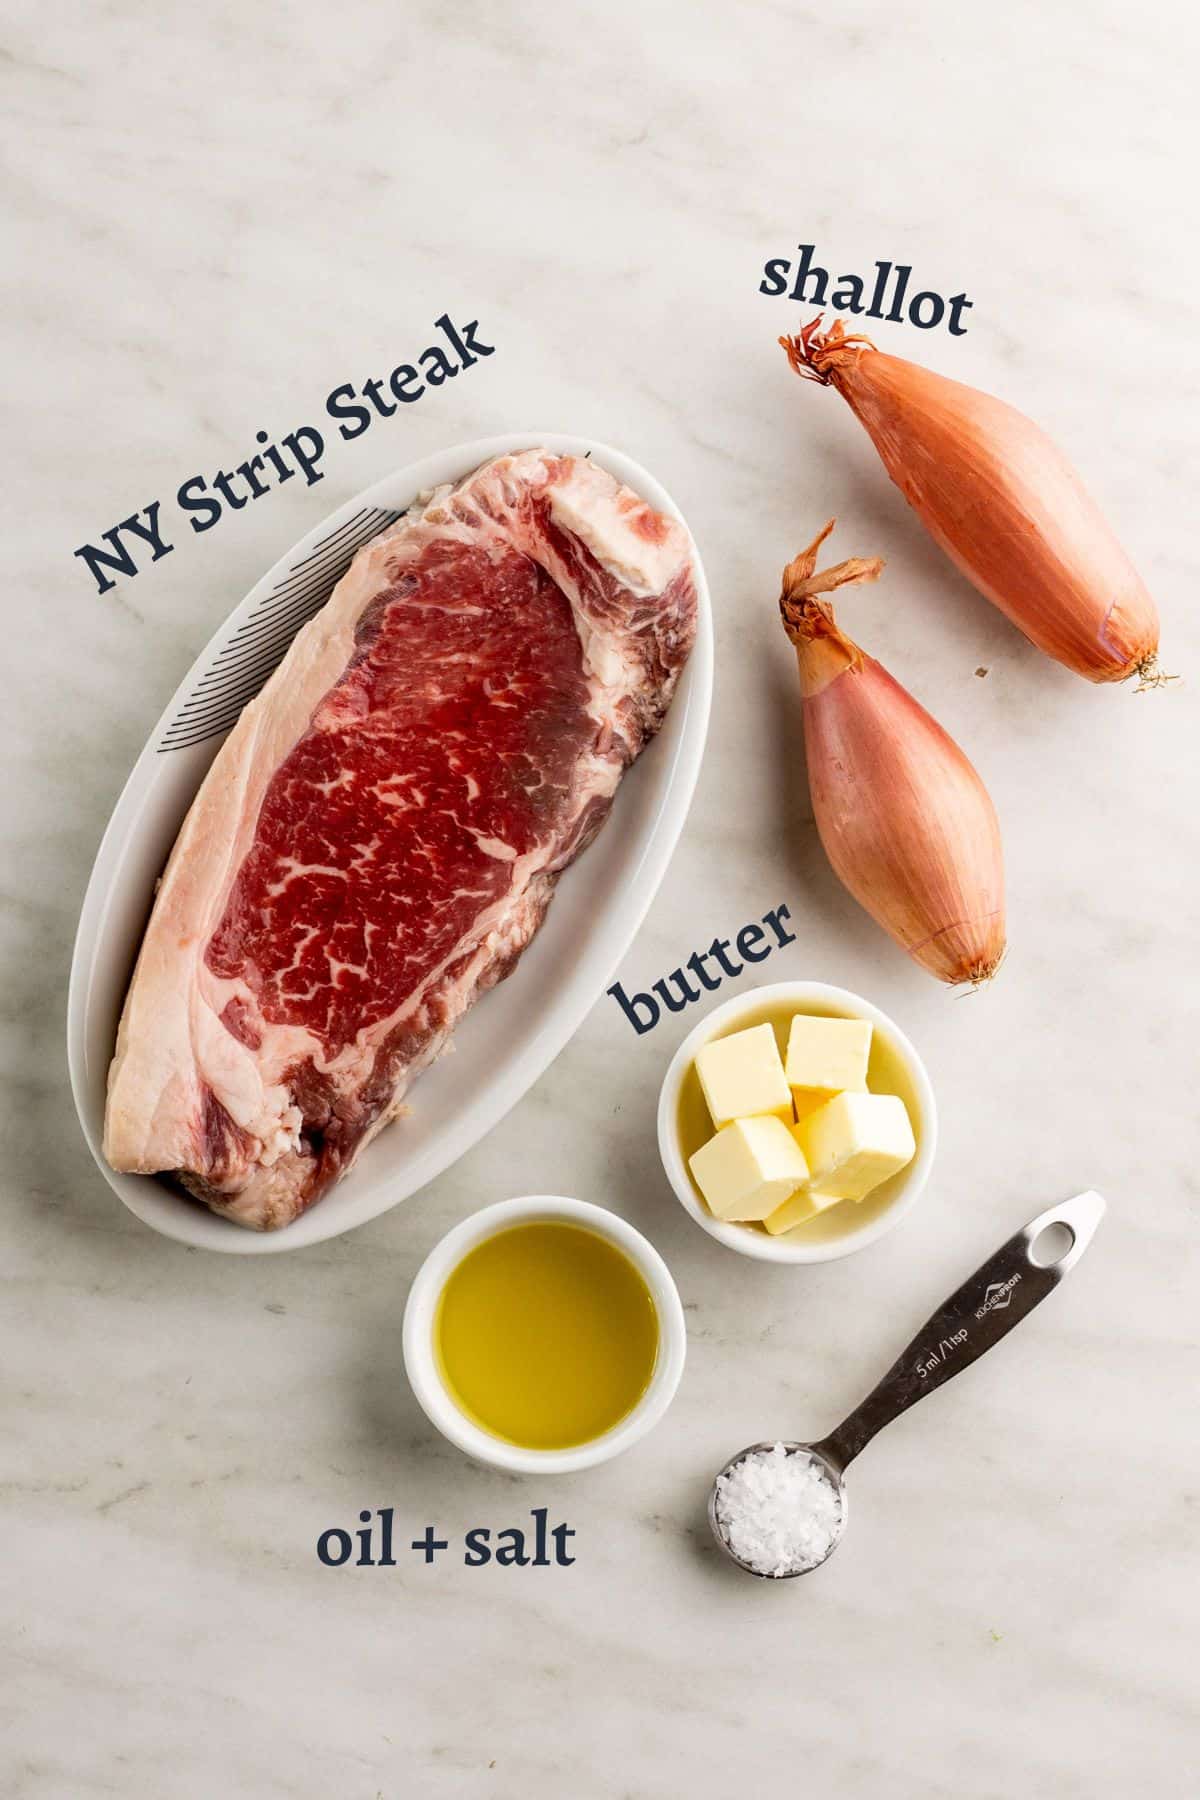 Ingredients for seared strip steak on stove.